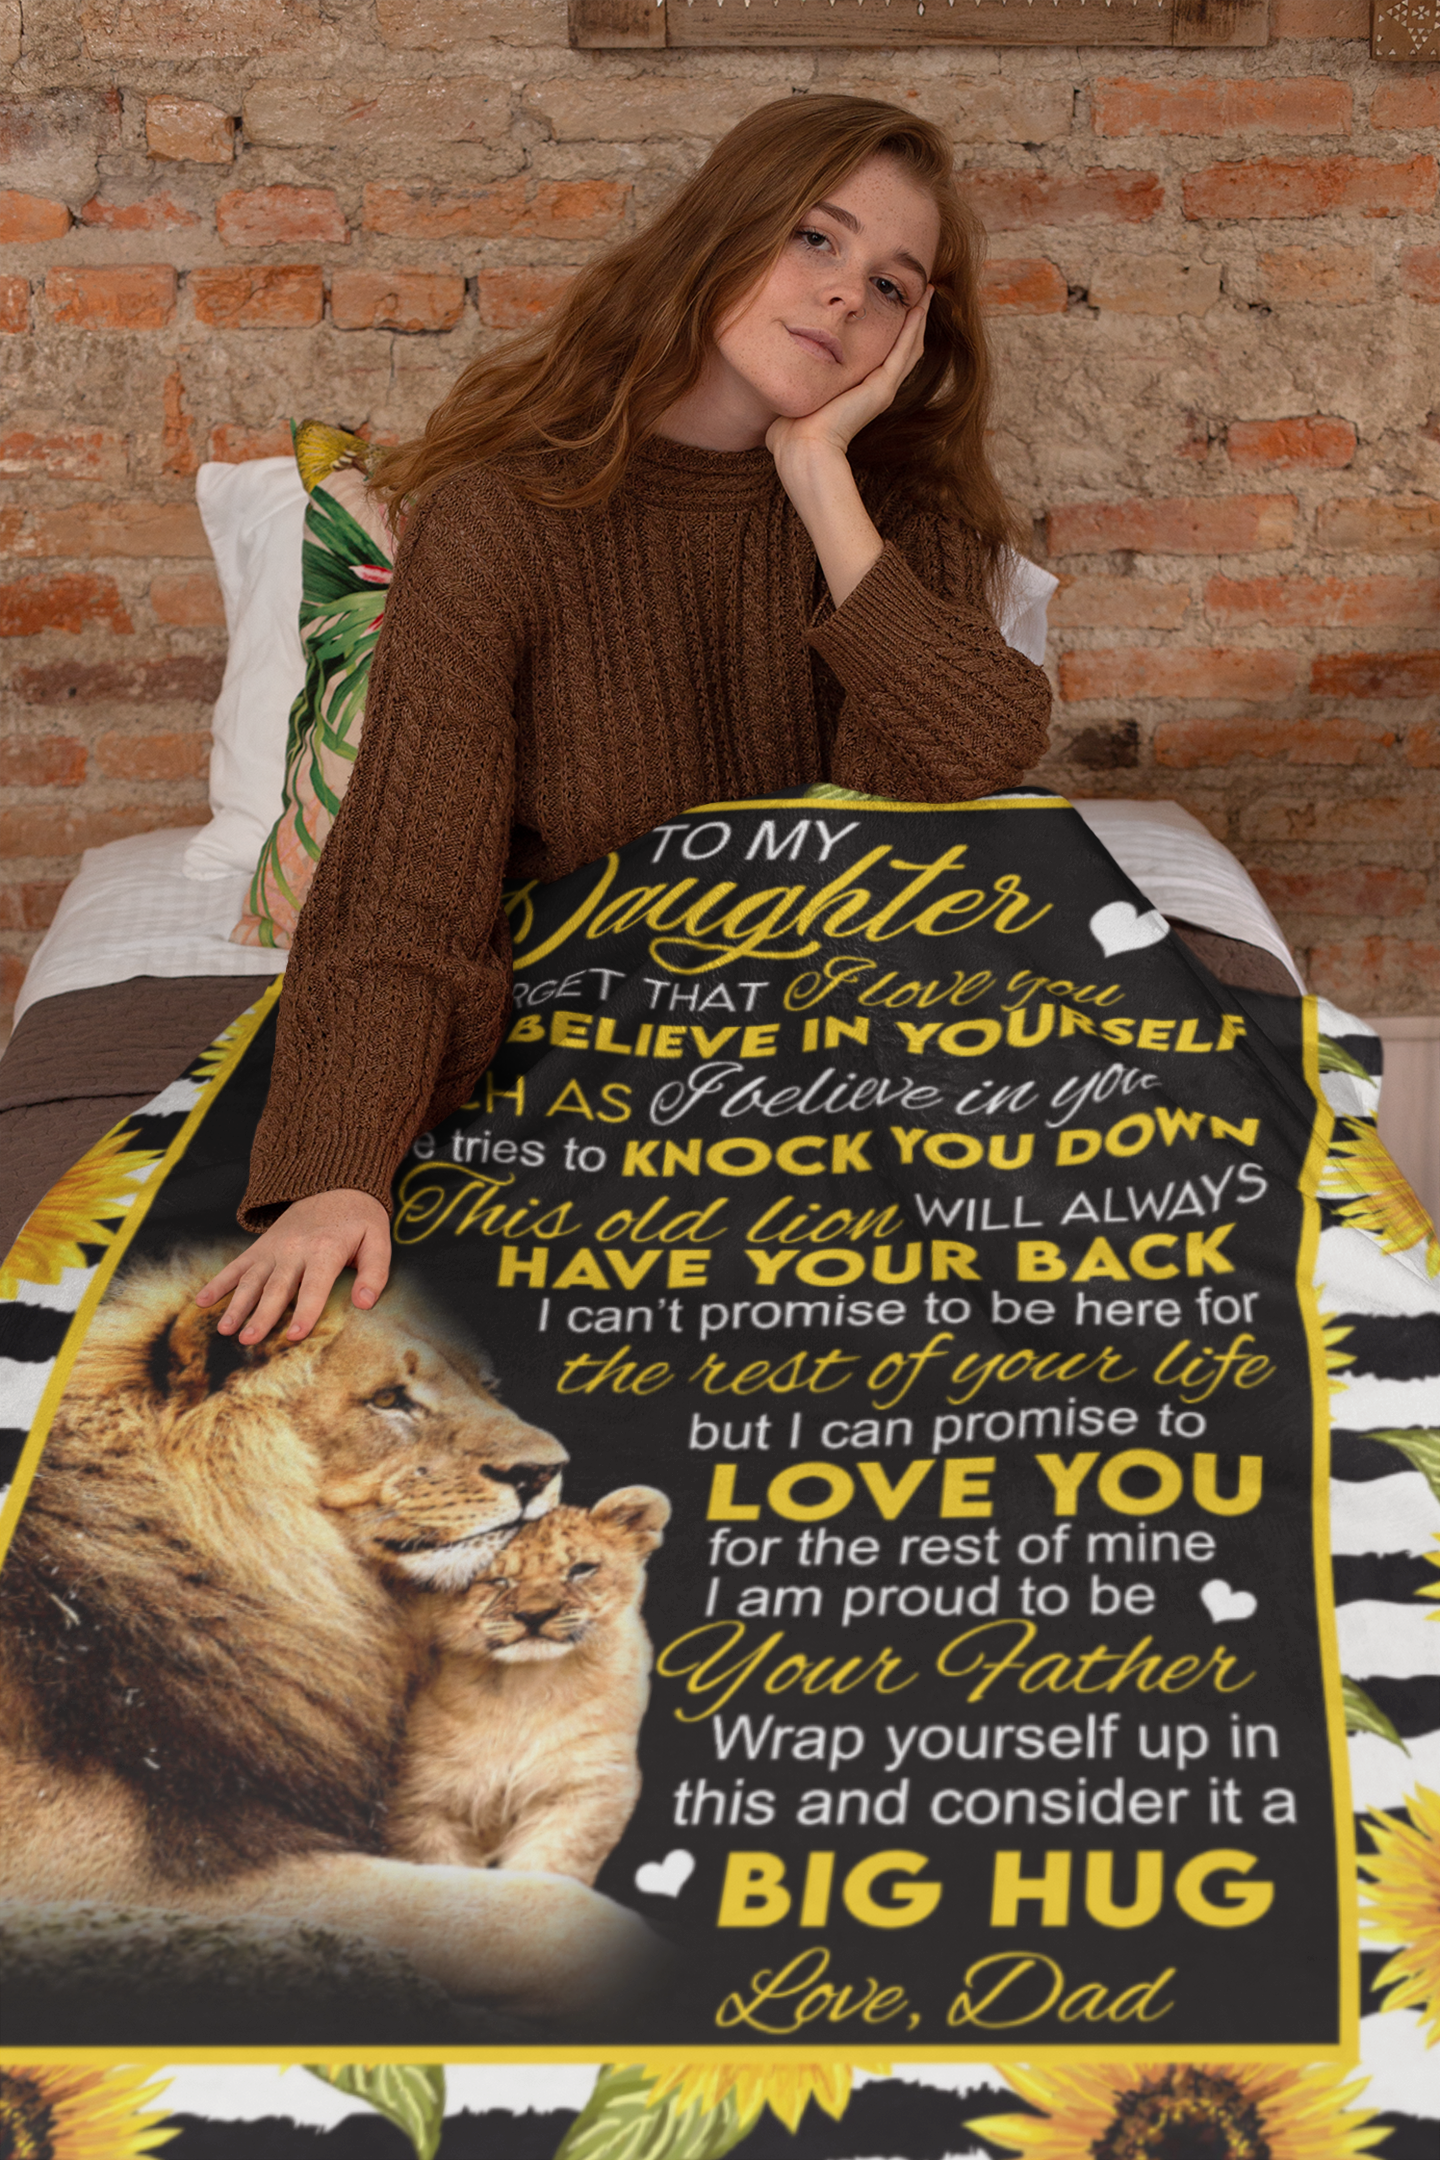 To My Daughter | Sunflower Lion Blanket From Dad | Throw Blanket 50"x60" | PF